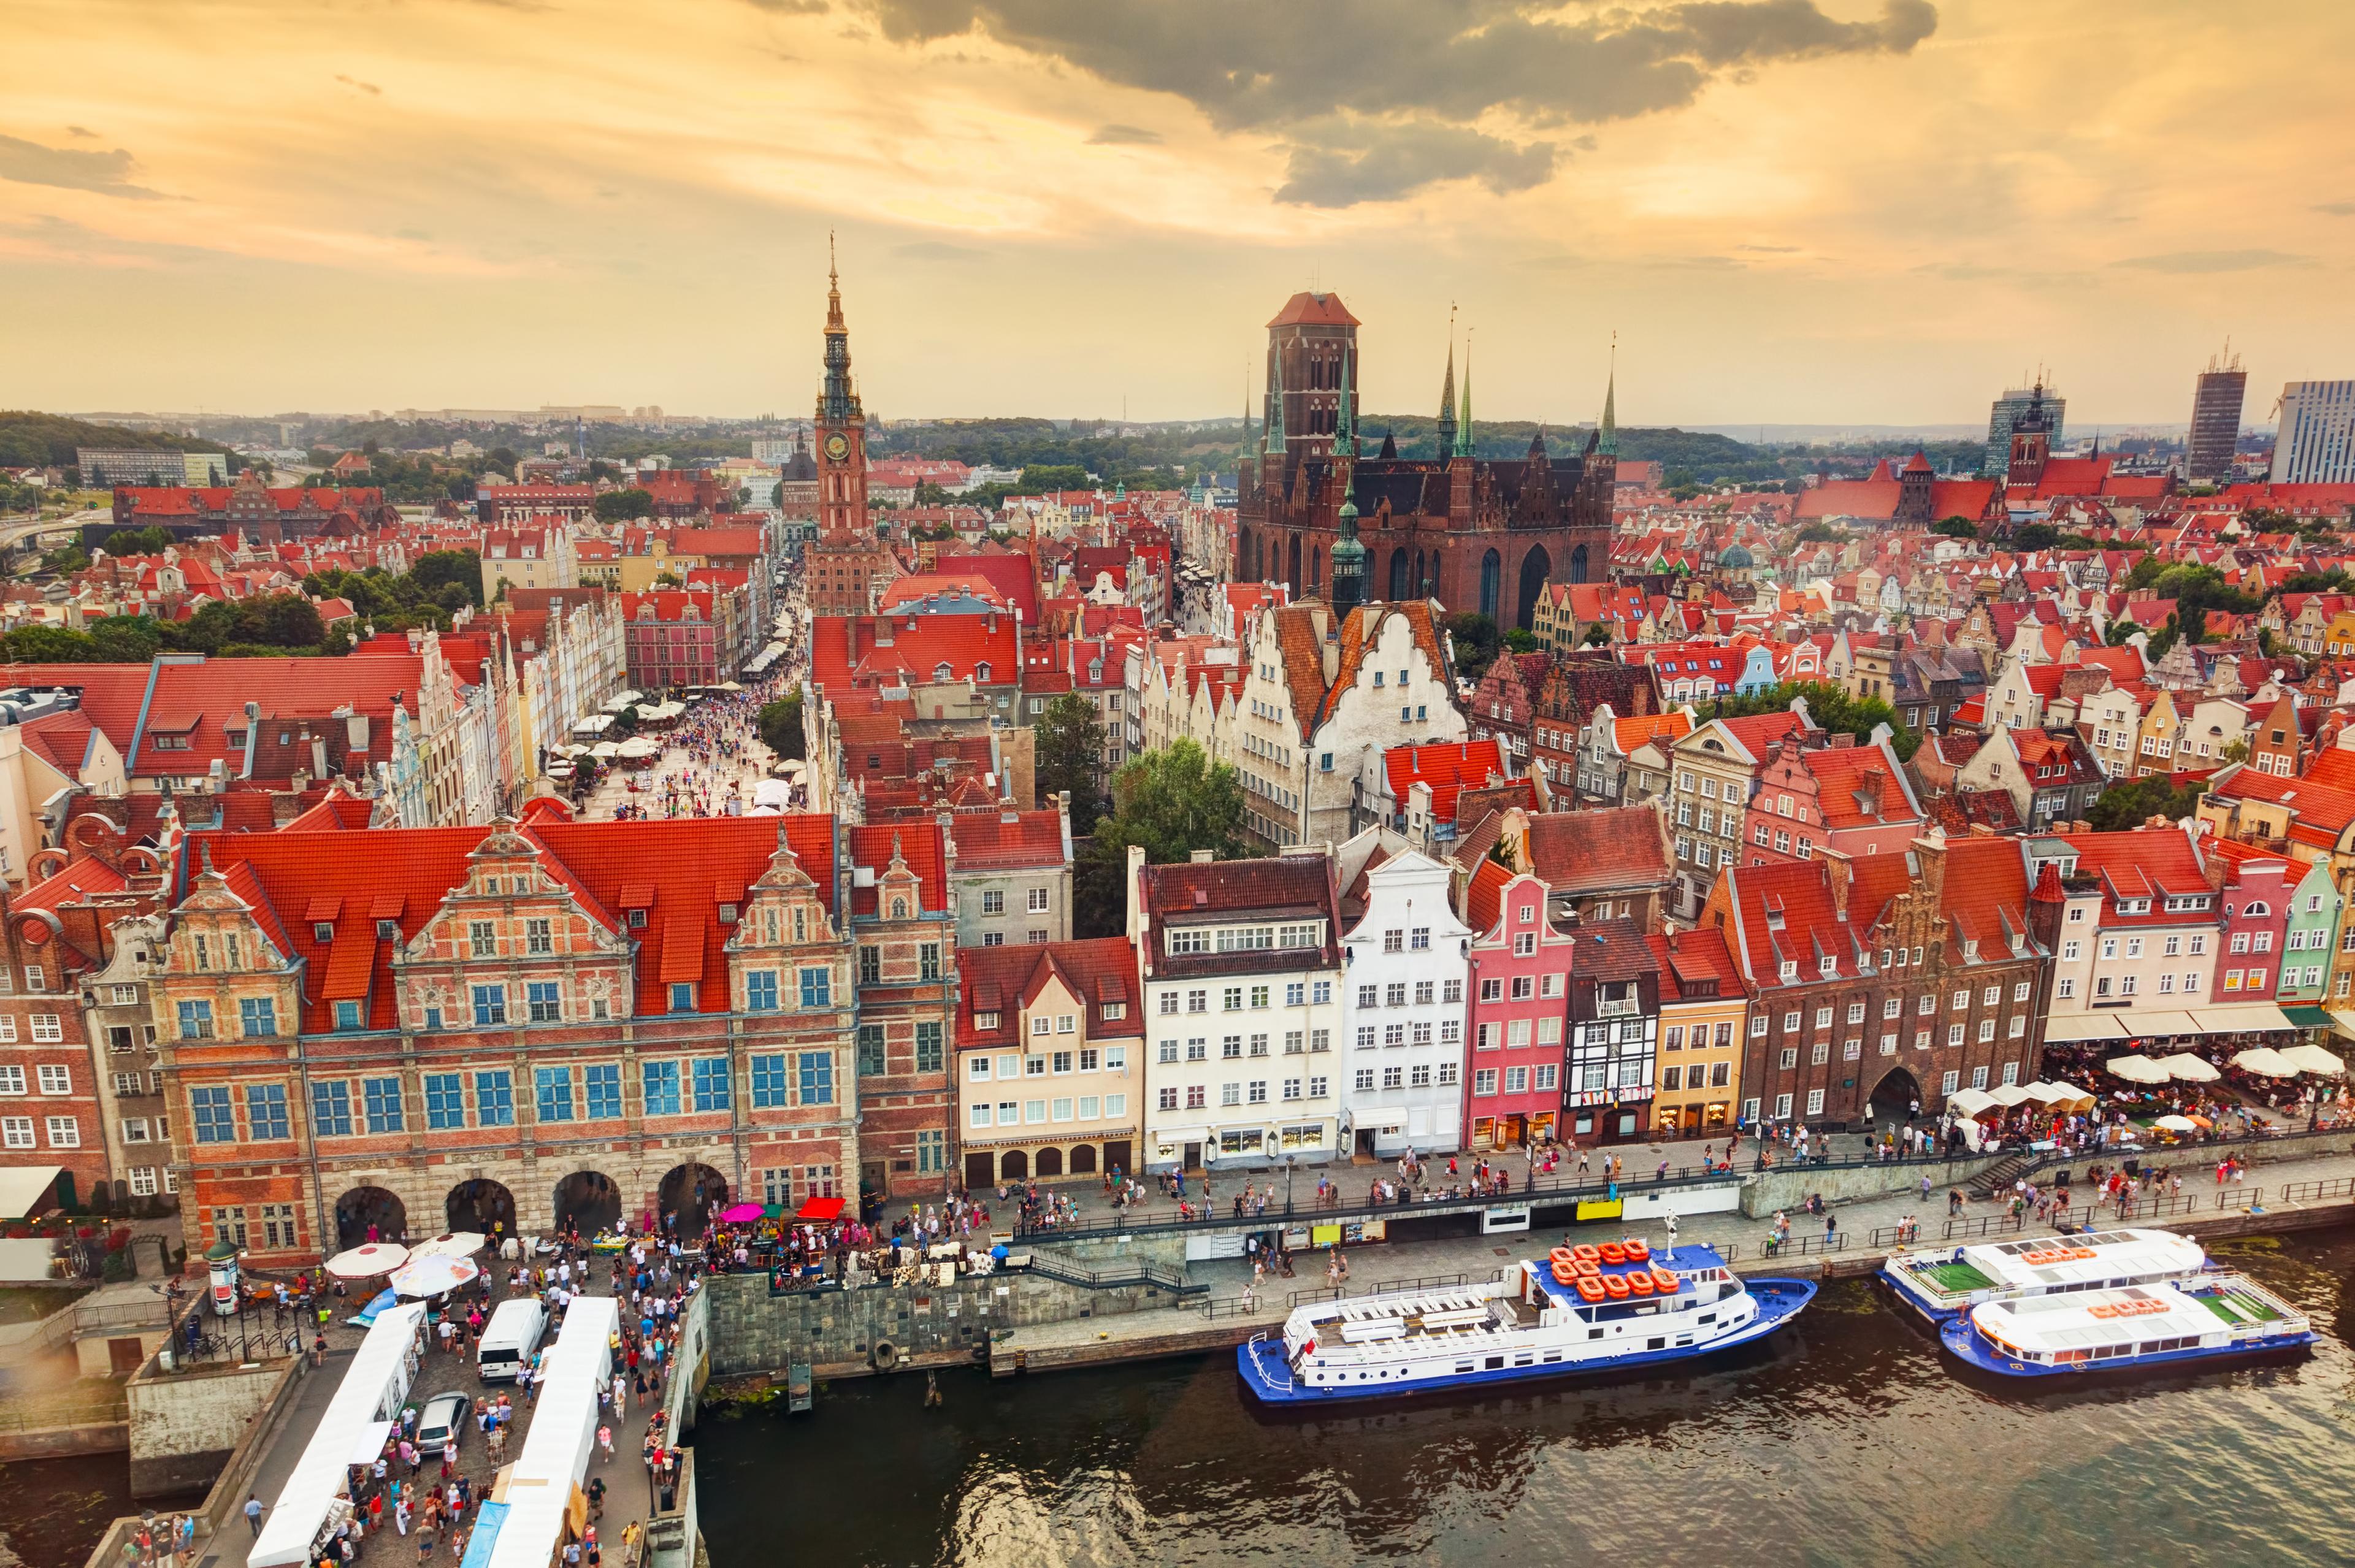 The Gdansk city, cover photo